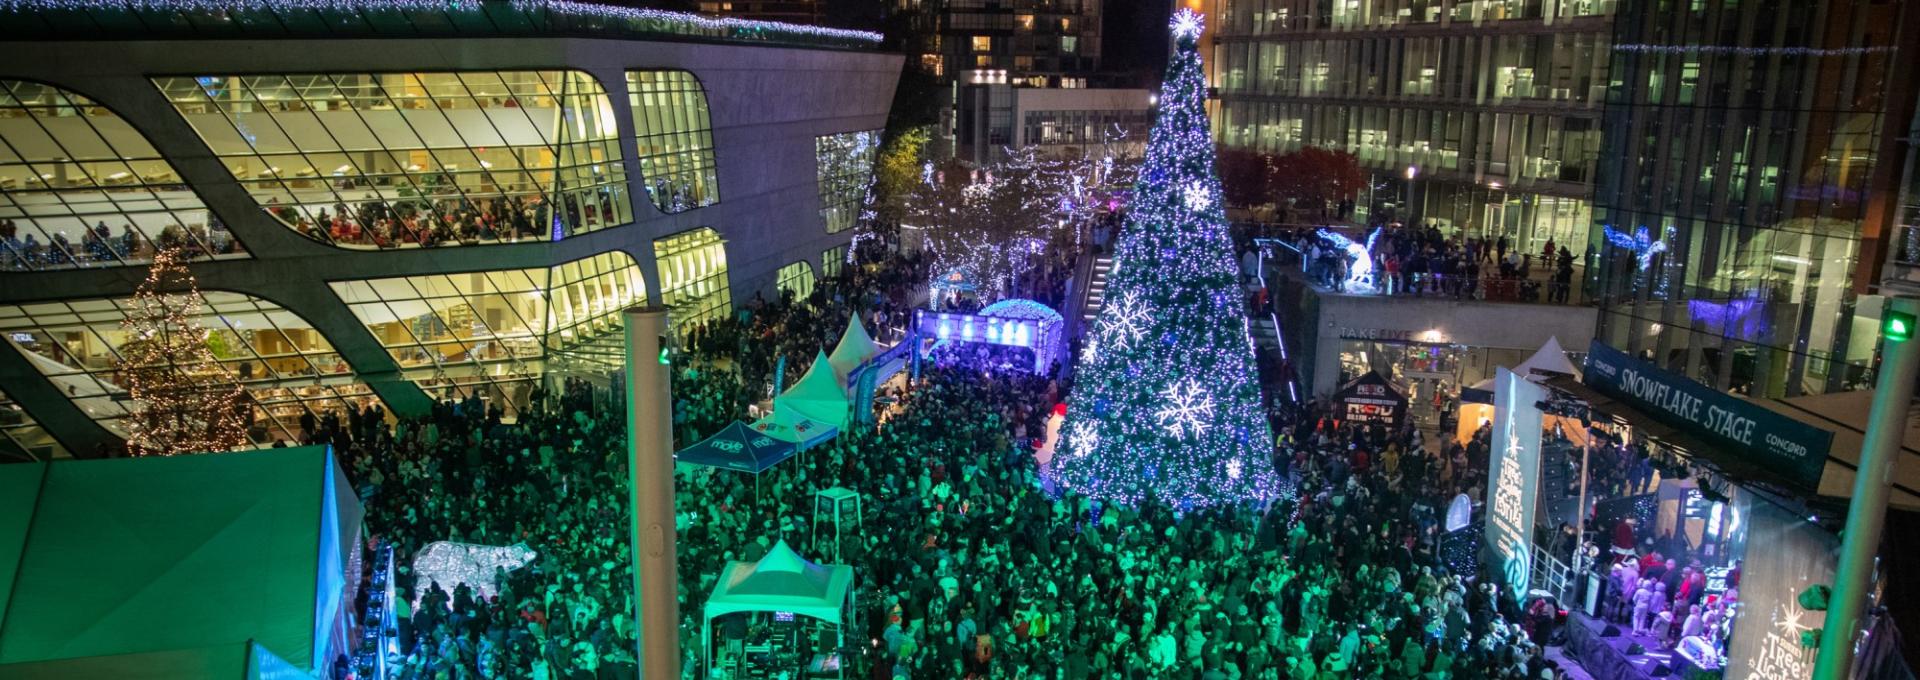 Surrey Tree Lighting Festival & Holiday Market Sees Record Numbers at